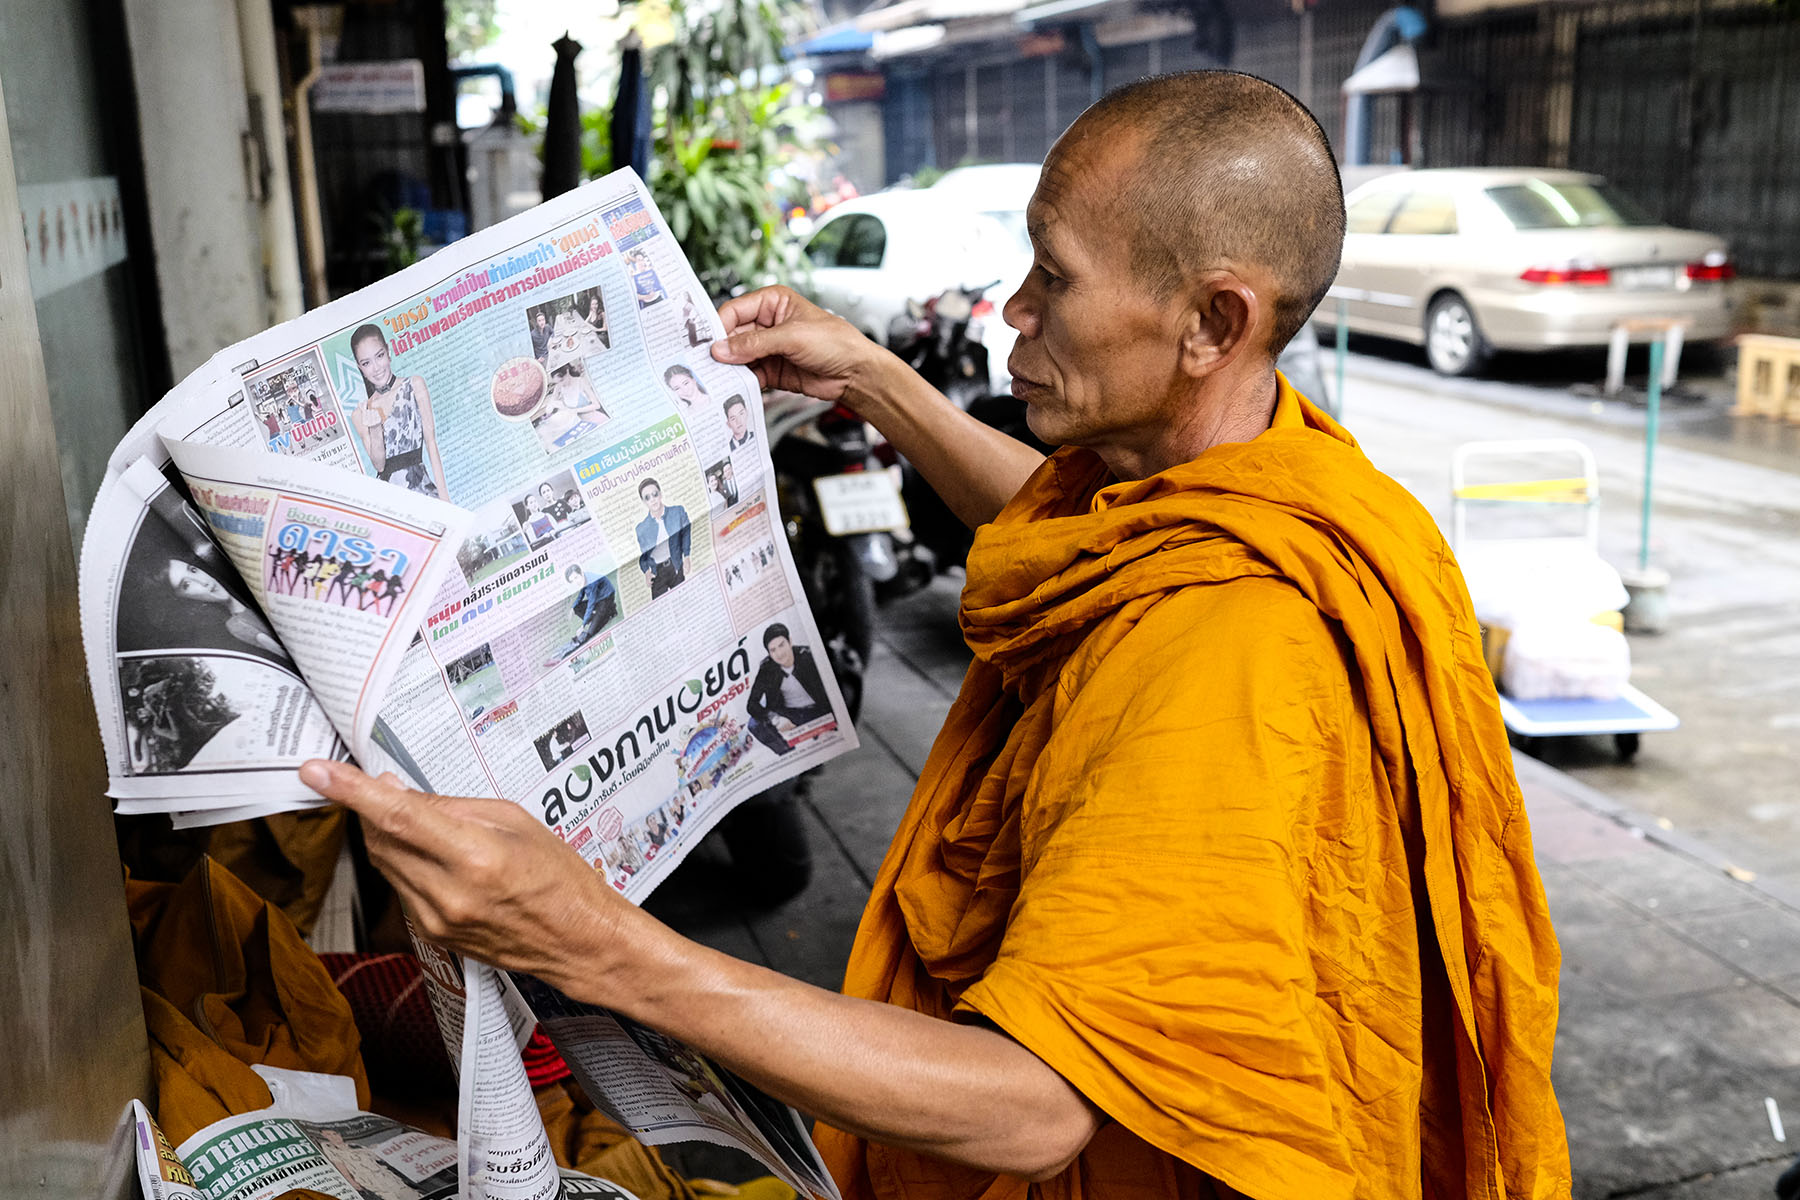 A Thai Buddhist monk reads a newspaper as he waits for others to join him during his morning walk.